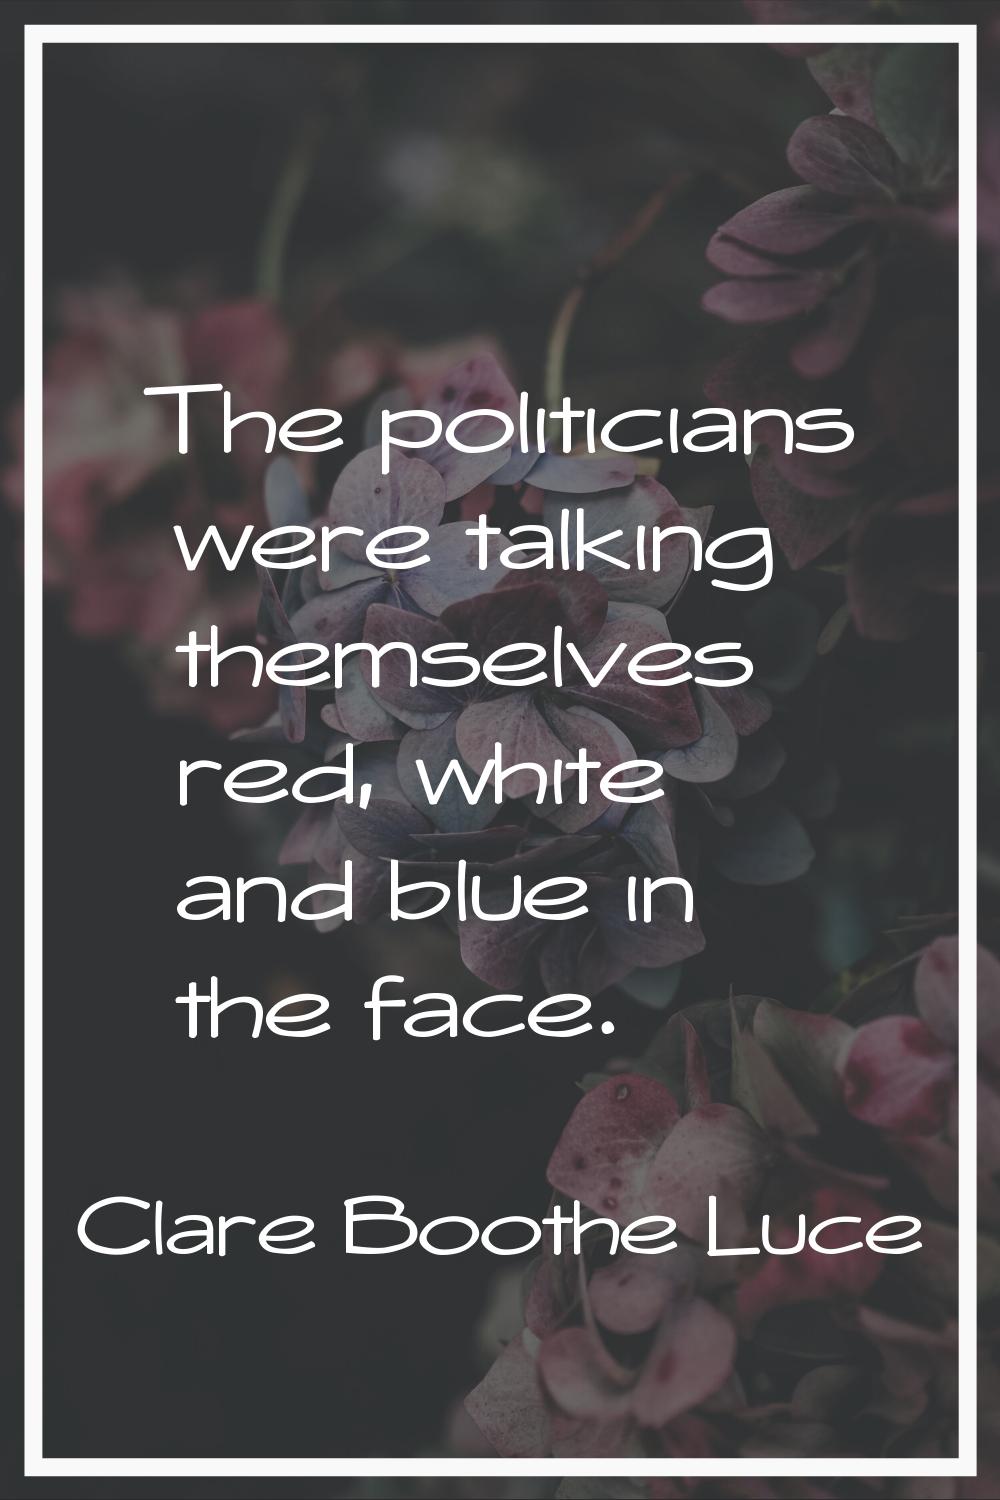 The politicians were talking themselves red, white and blue in the face.